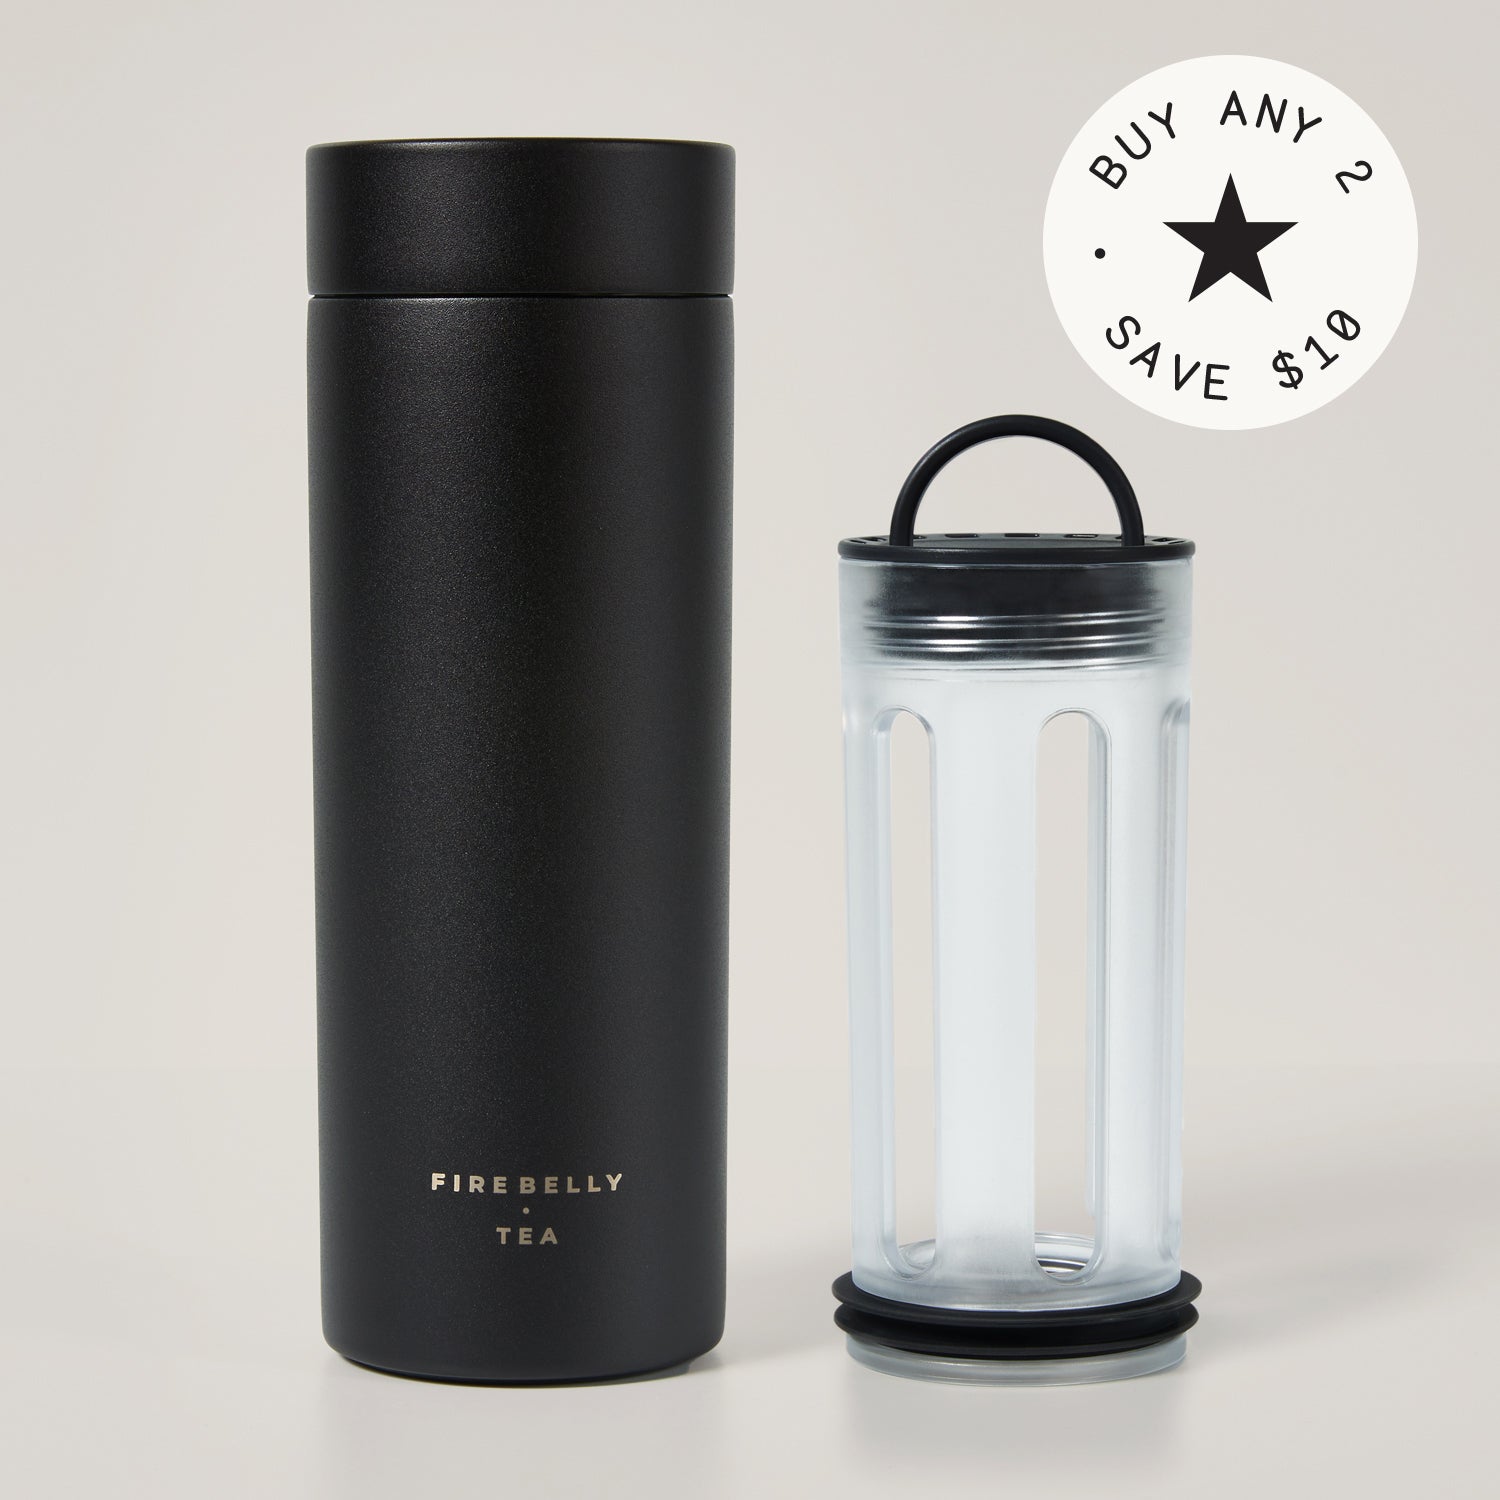 A sleek black travel tumbler with 'Firebelly Tea' branding and a discount promotion badge.